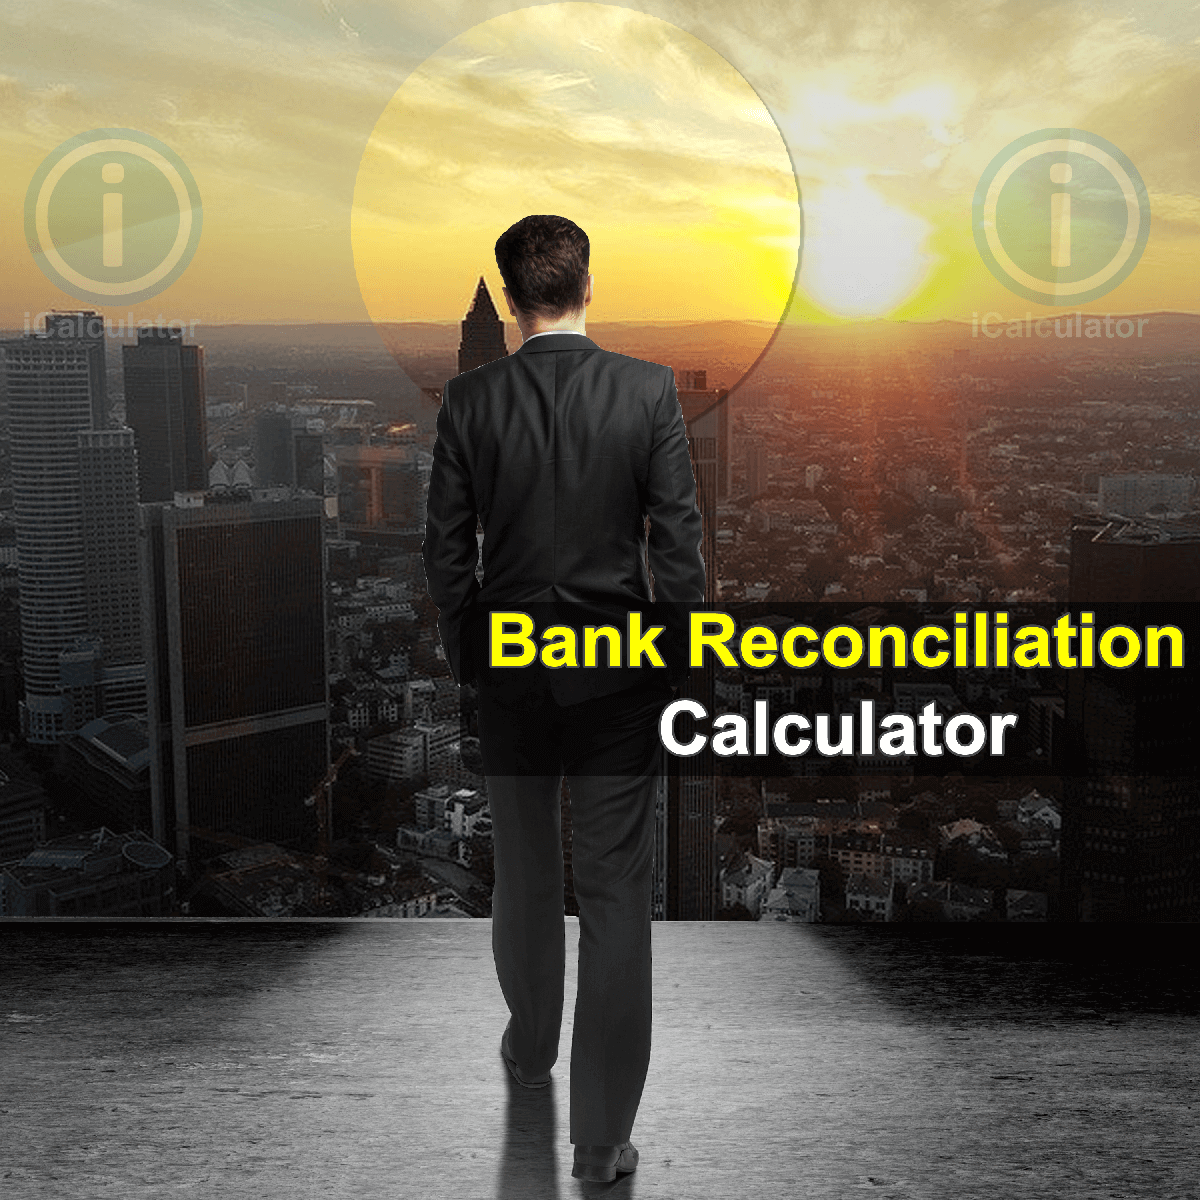 Bank Reconciliation Calculator: This image shows a company director calculating the reconciliation of accounts manually. The Bank Reconciliation Calculator allows you to explain the difference between the bank balance shown in a bank statement and the corresponding amount shown in your own accounting records.